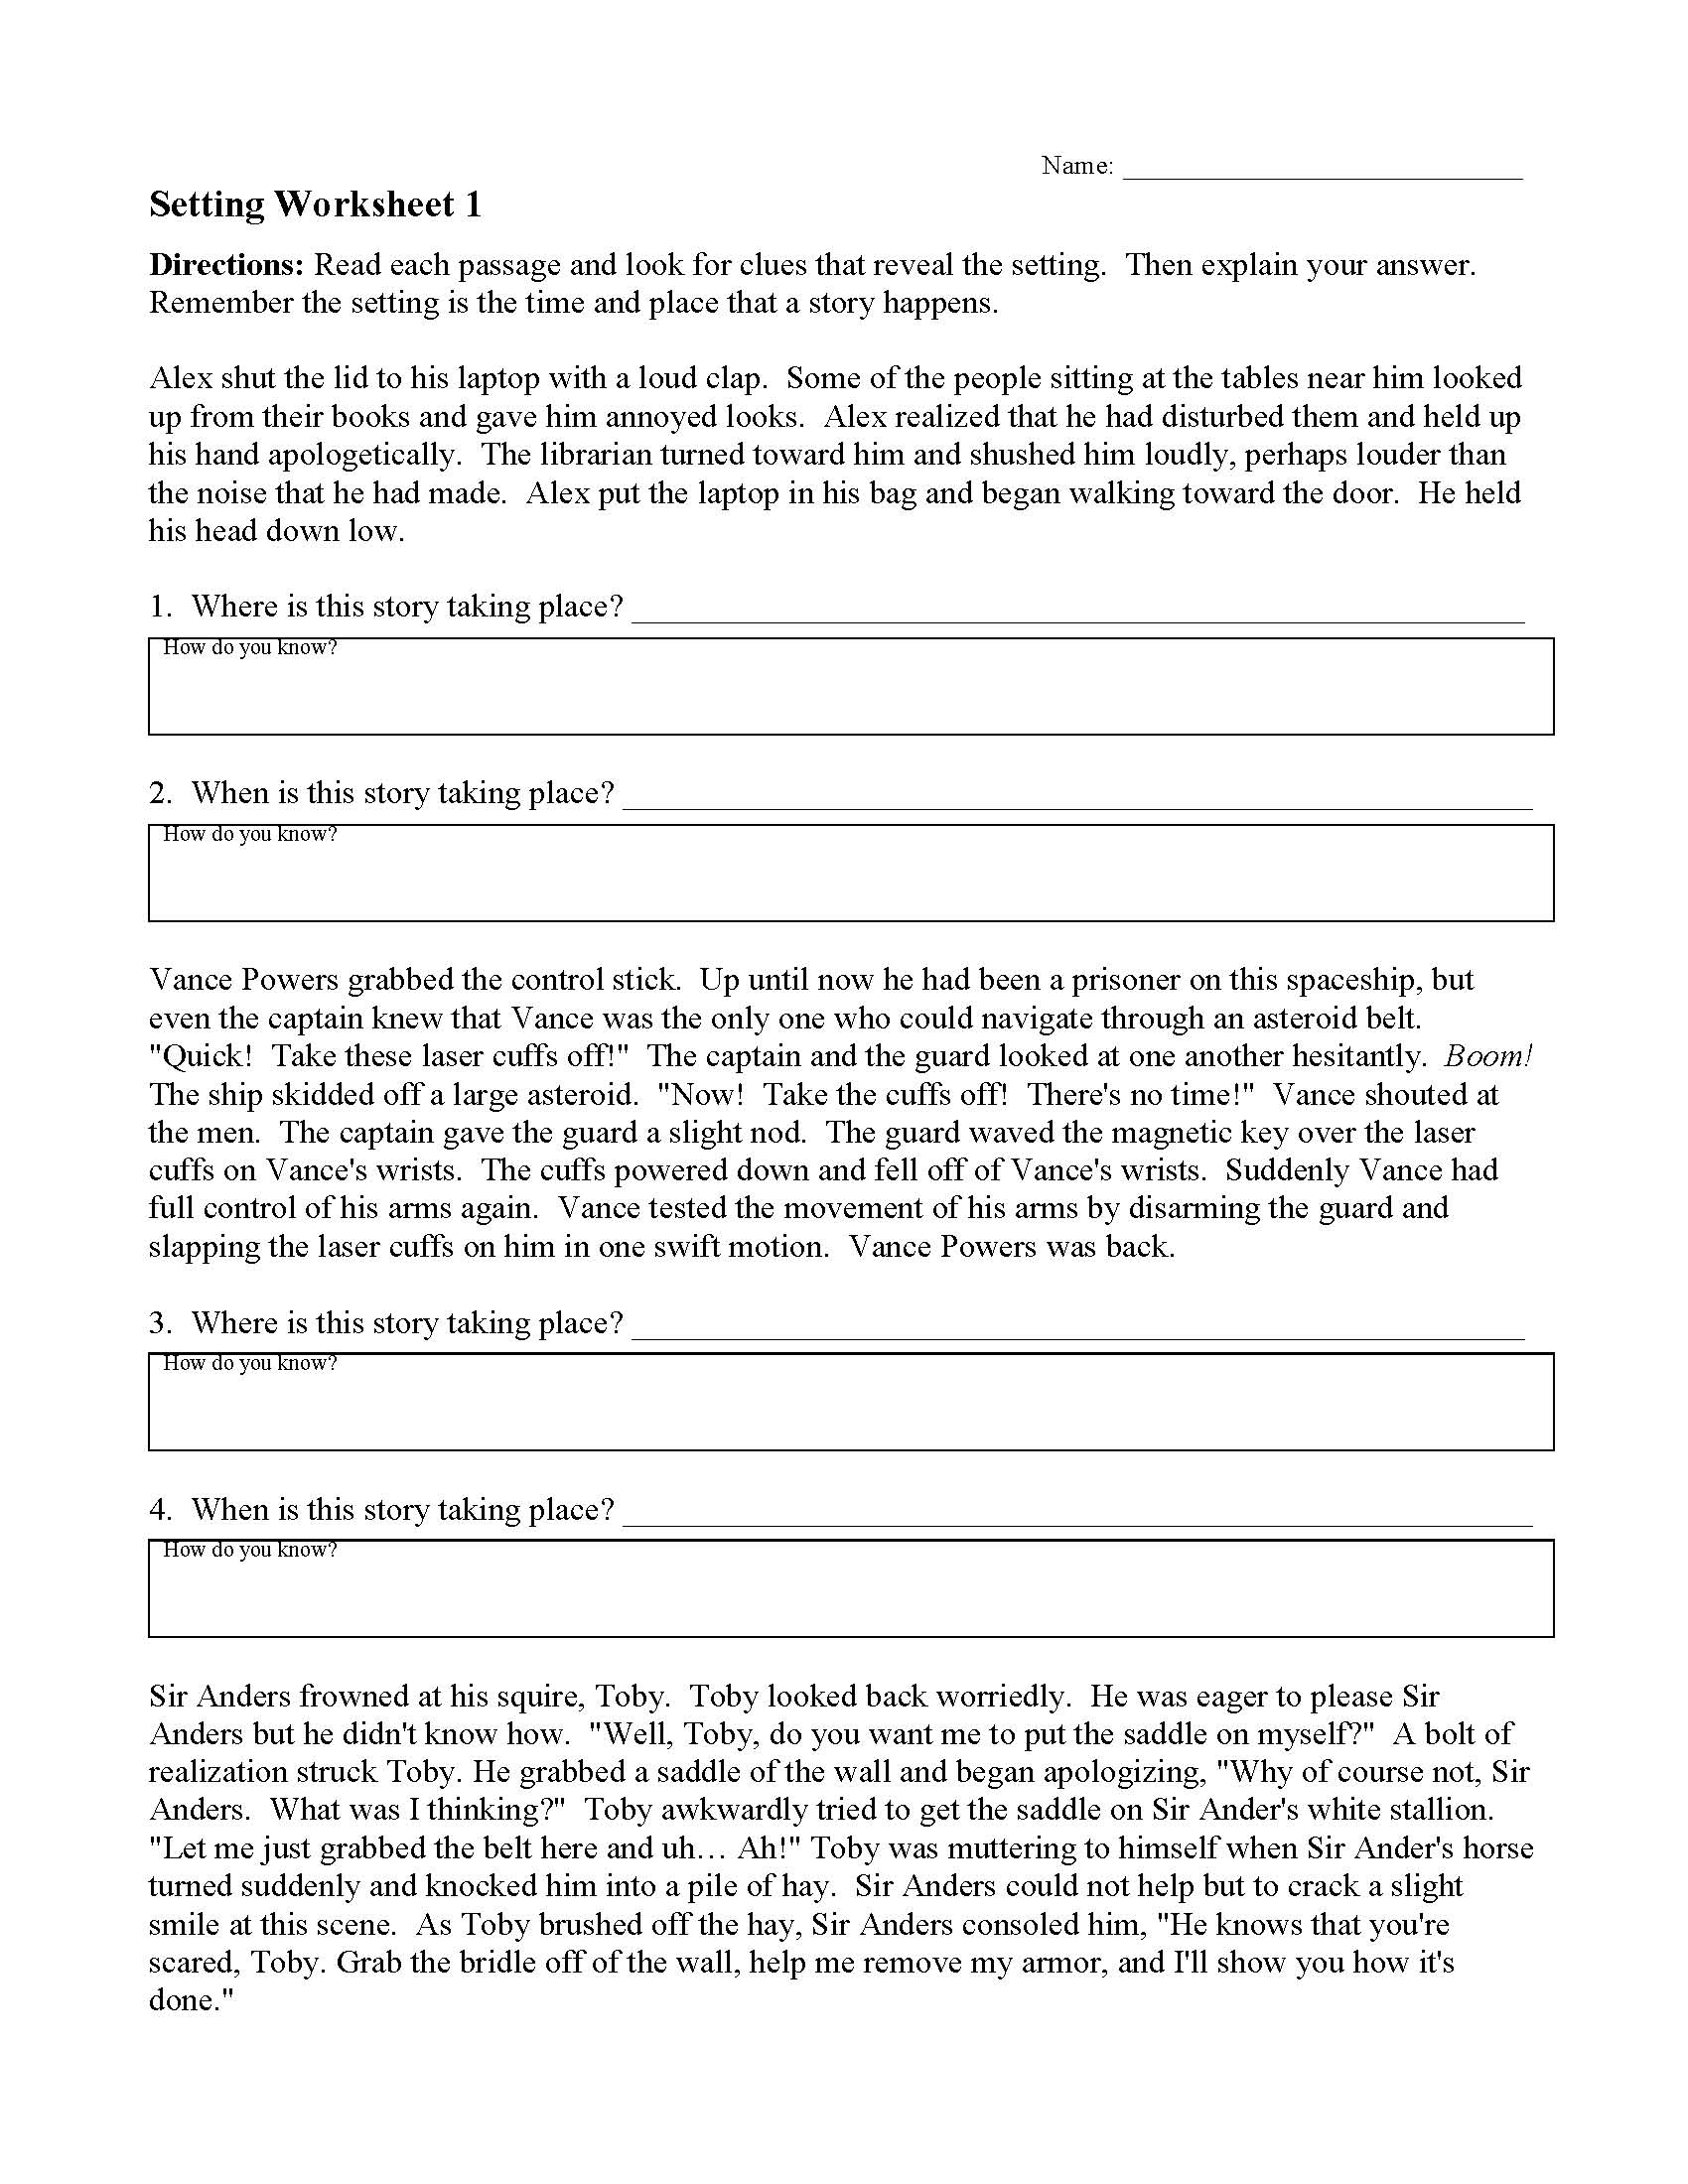 This is a preview image of Setting Worksheet 1. Click on it to enlarge it or view the source file.